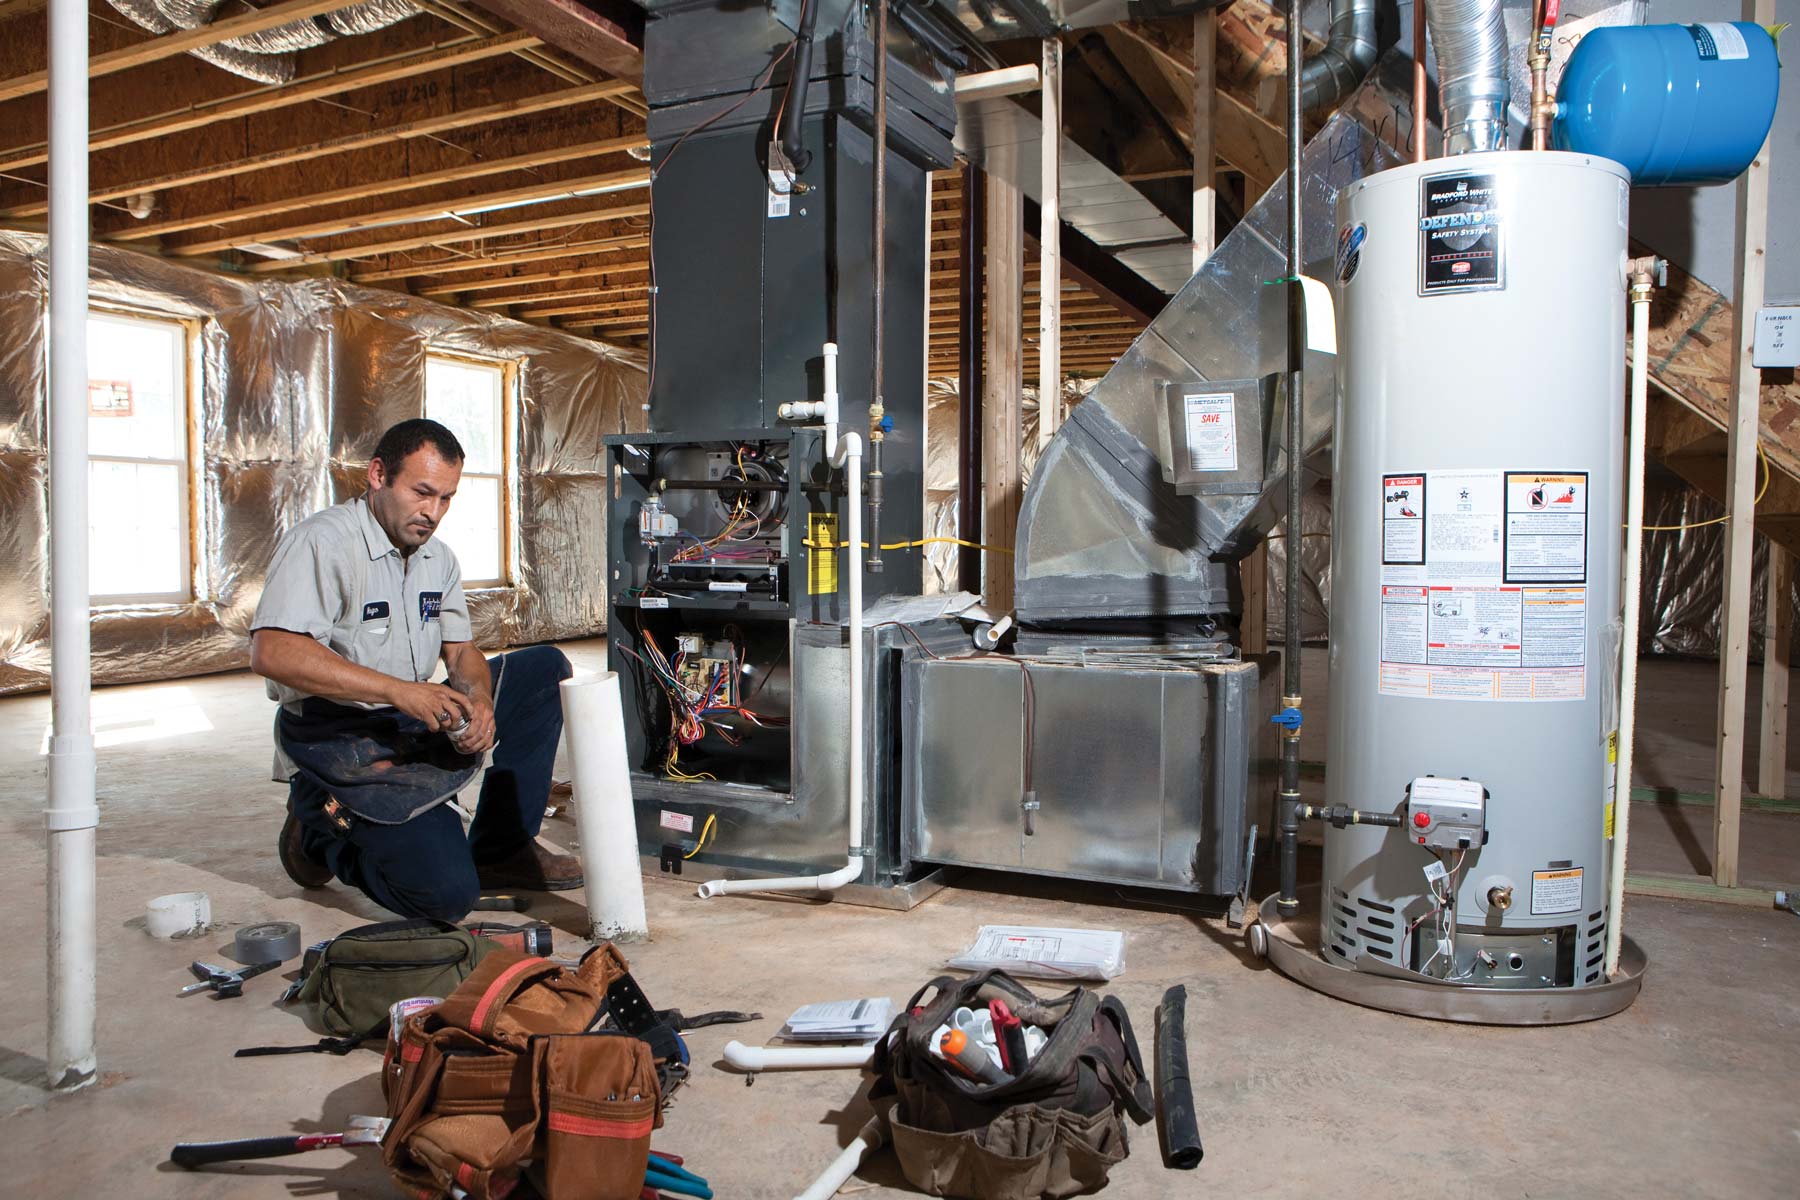 24 Hour Emergency Heat Repair For Propane/Gas Heating Systems